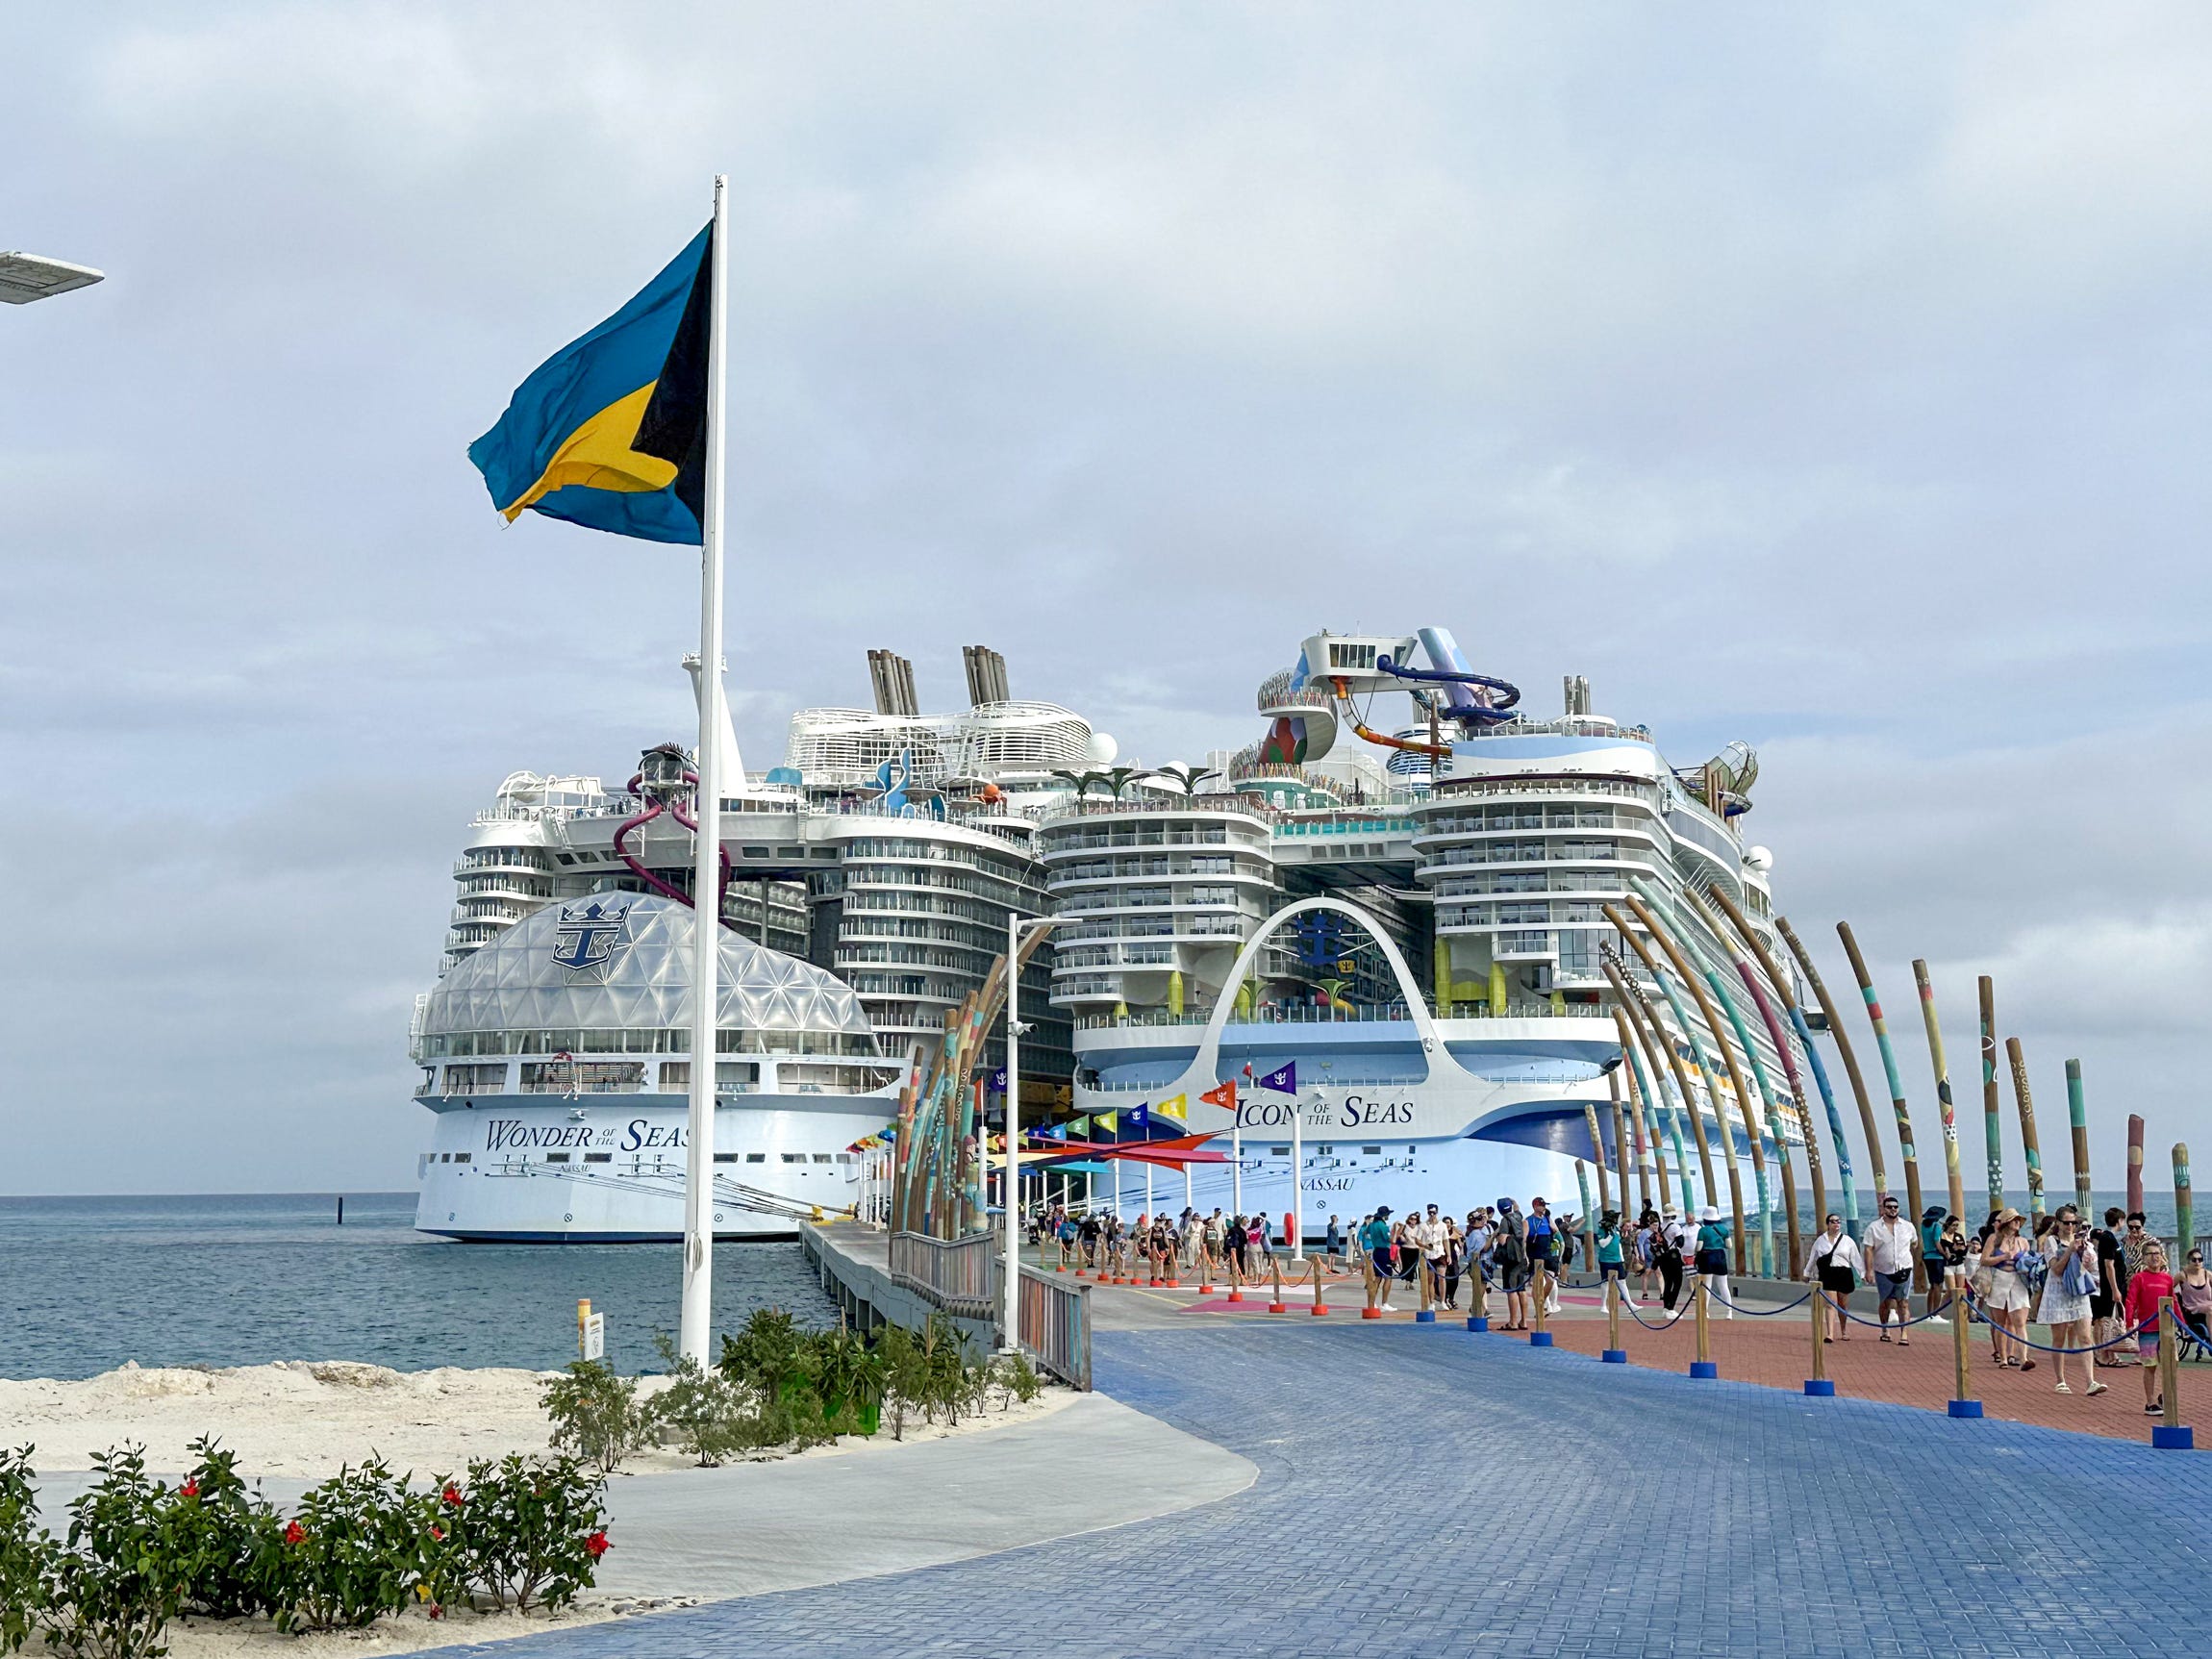 Royal Caribbean's Wonder of the Seas and Icon of the Seas were docked at the cruise line's private island ahead of the latter's debut. <a>Sharon Yattaw</a>